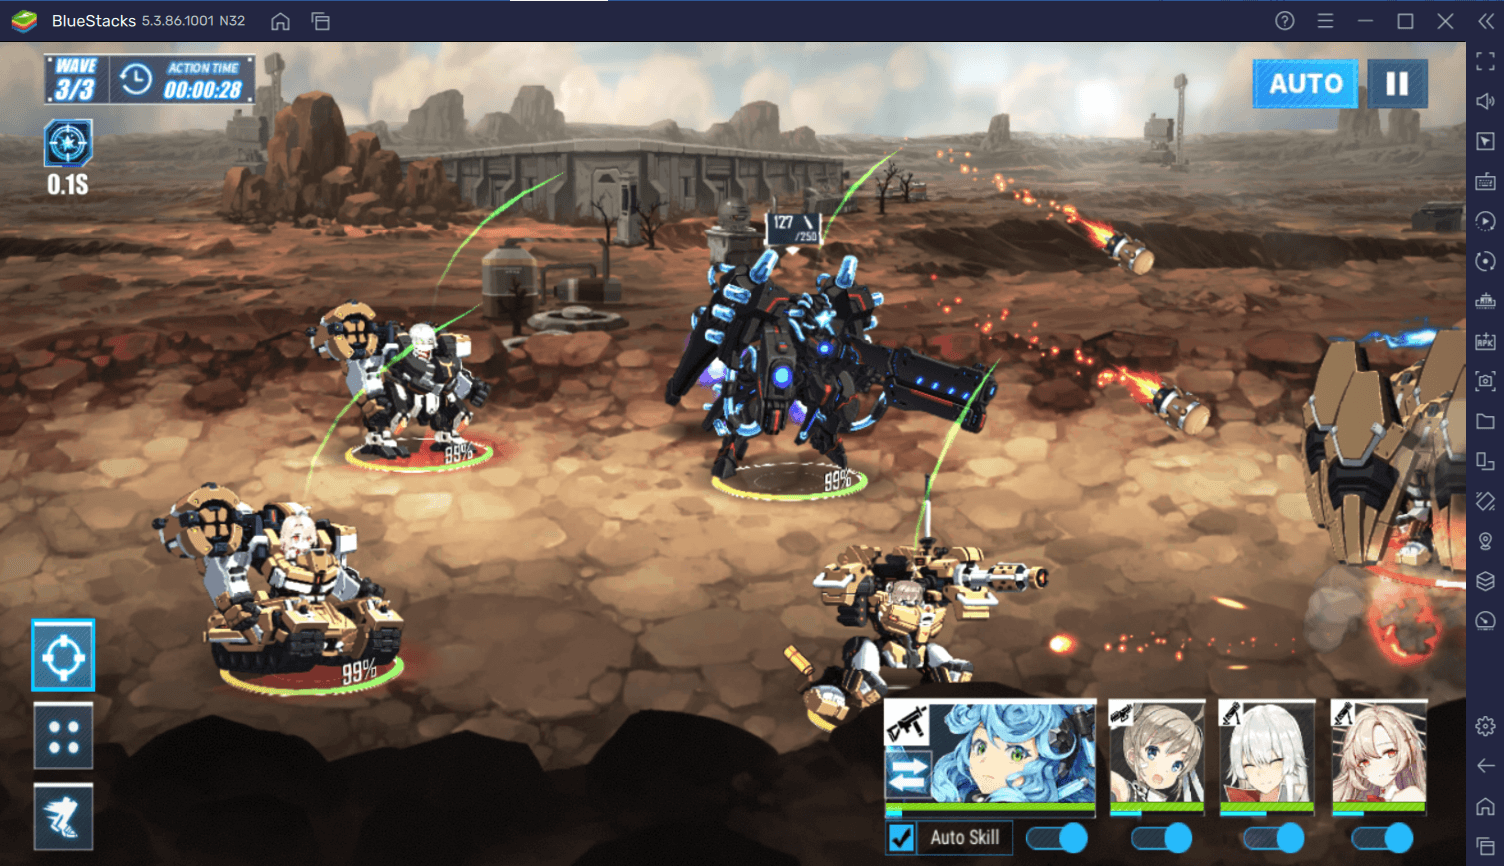 Final Gear: Use BlueStacks Features To Increase Efficiency and Ease of Playing